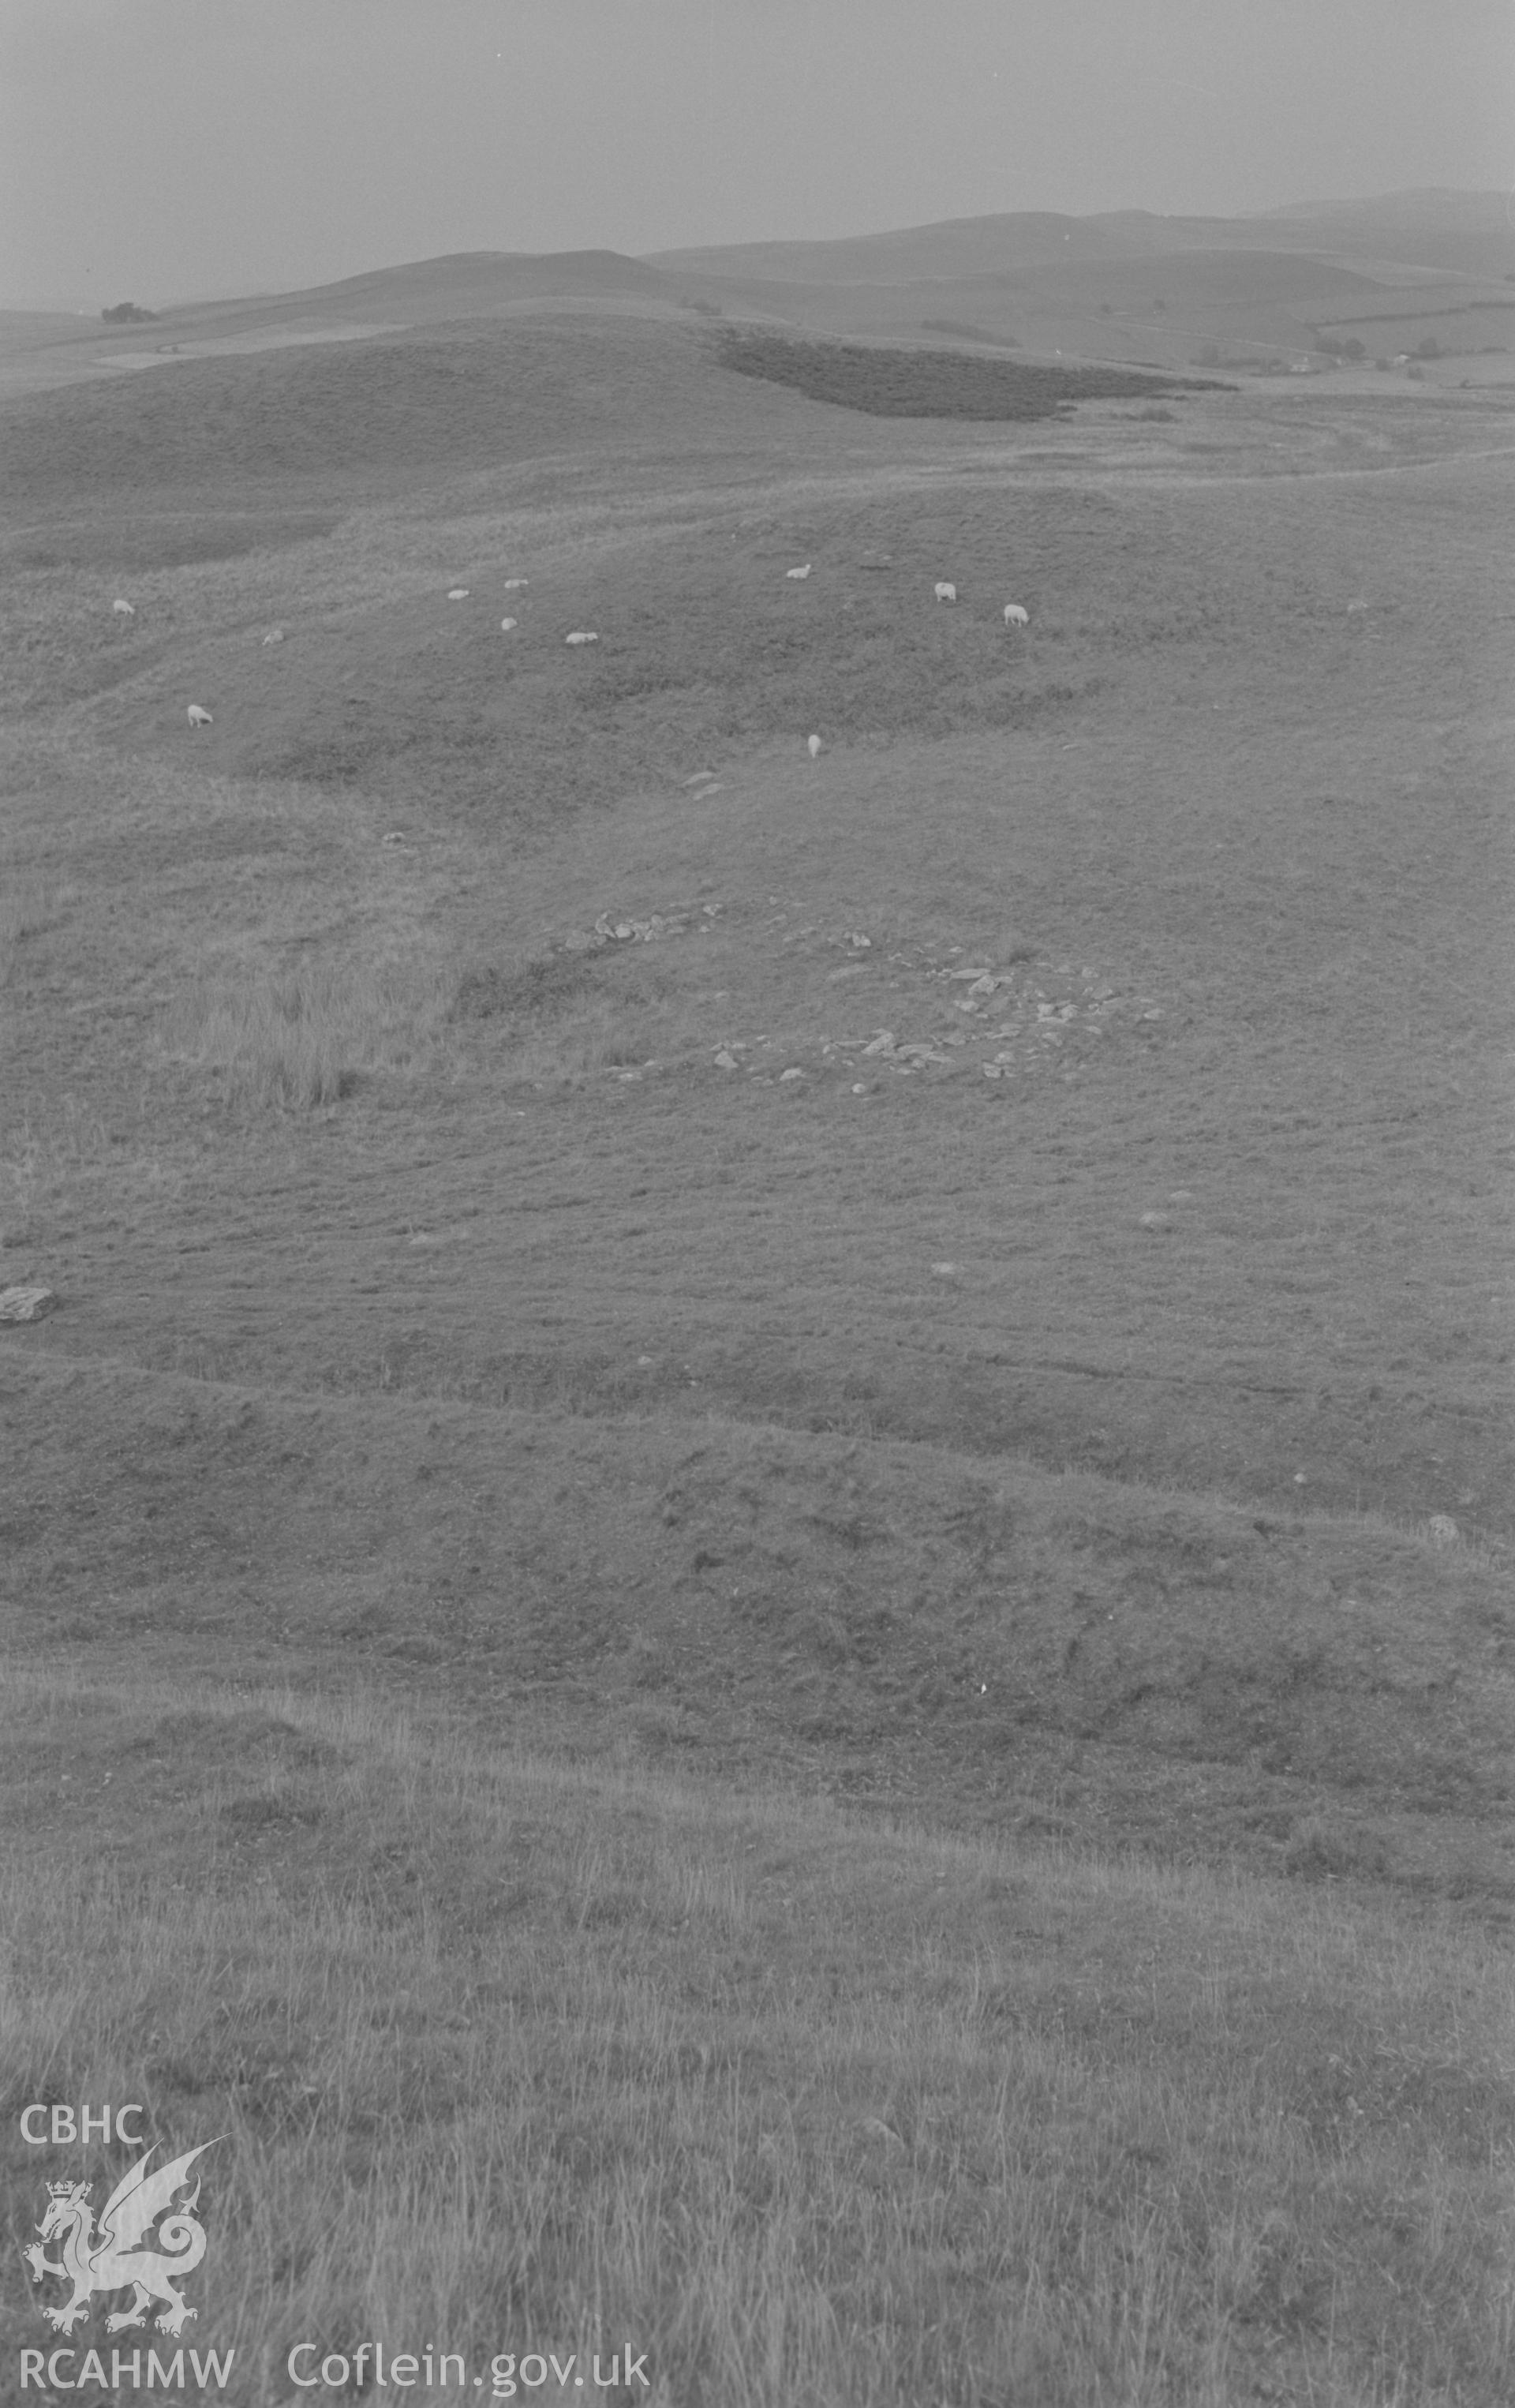 Digital copy of black & white negative showing the triple entrance ramparts on the north side of Pen-y-Bannau iron age camp. Photographed by Arthur O. Chater on 25th August 1967, looking north from Grid Reference SN 742 669. (Panorama, photograph 2 of 5)